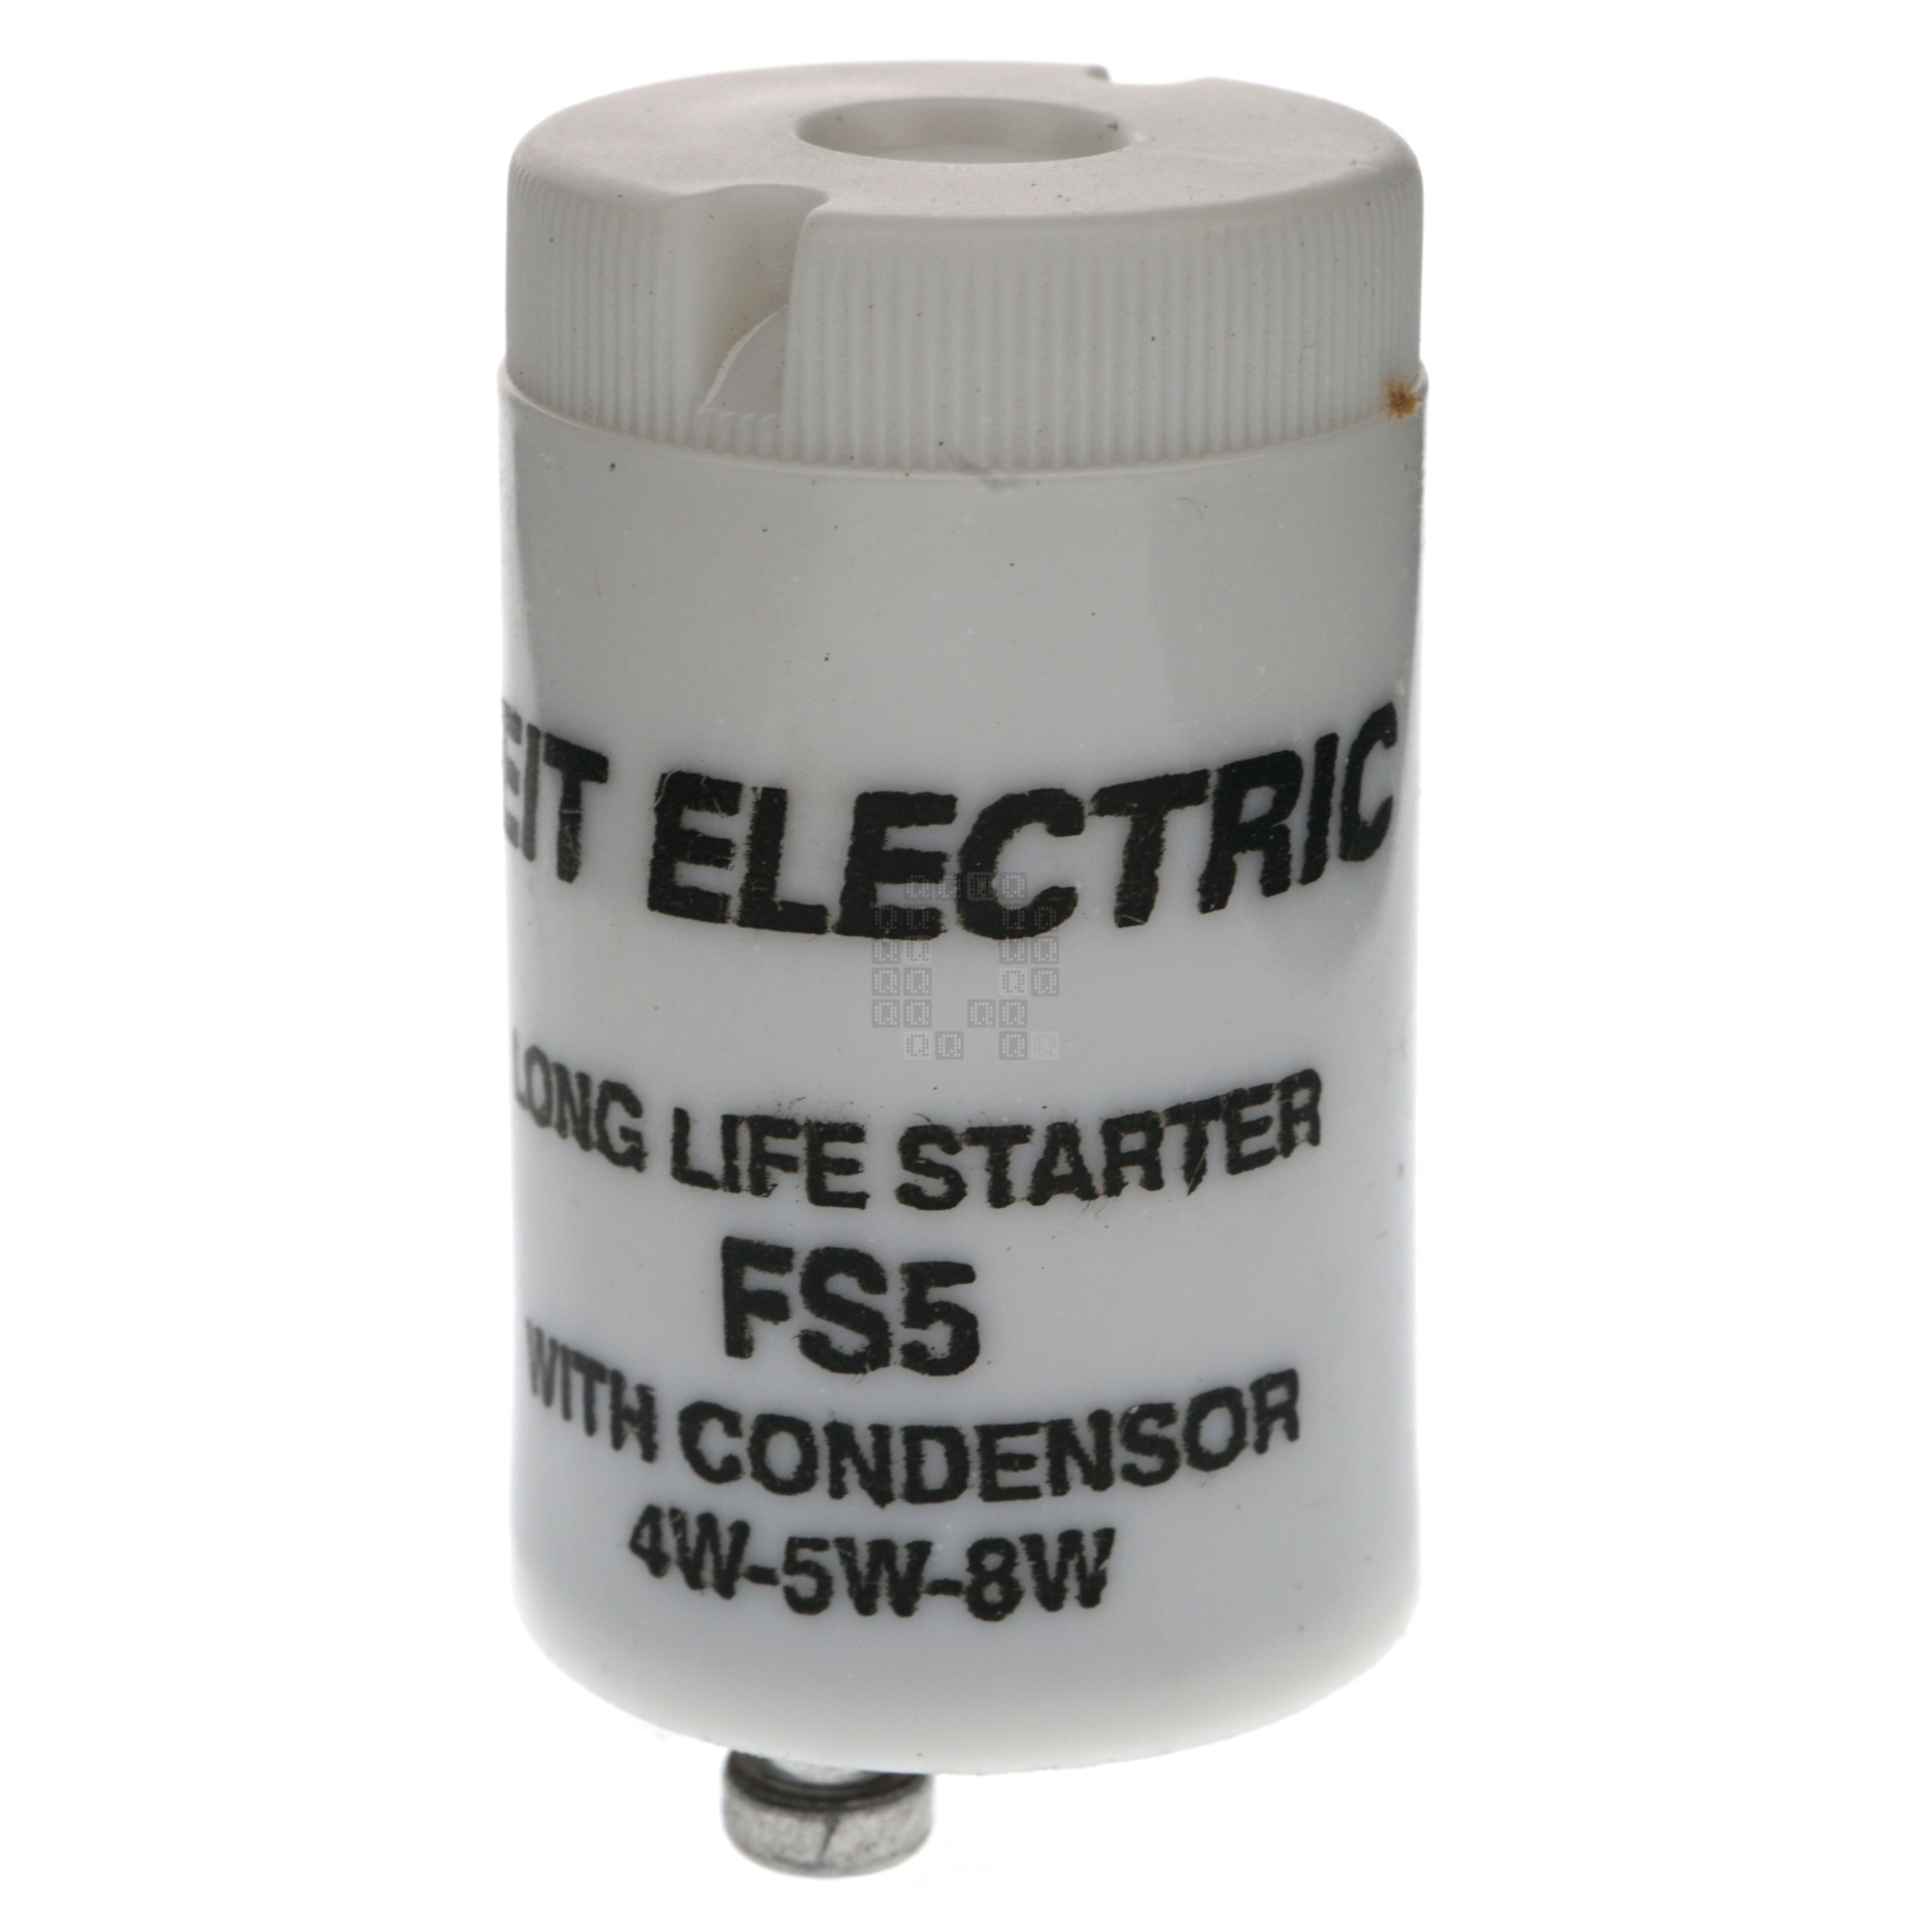 Feit Electric FS5 Fluorescent Long Life Starter with Condenser, 4, 5 or 8W